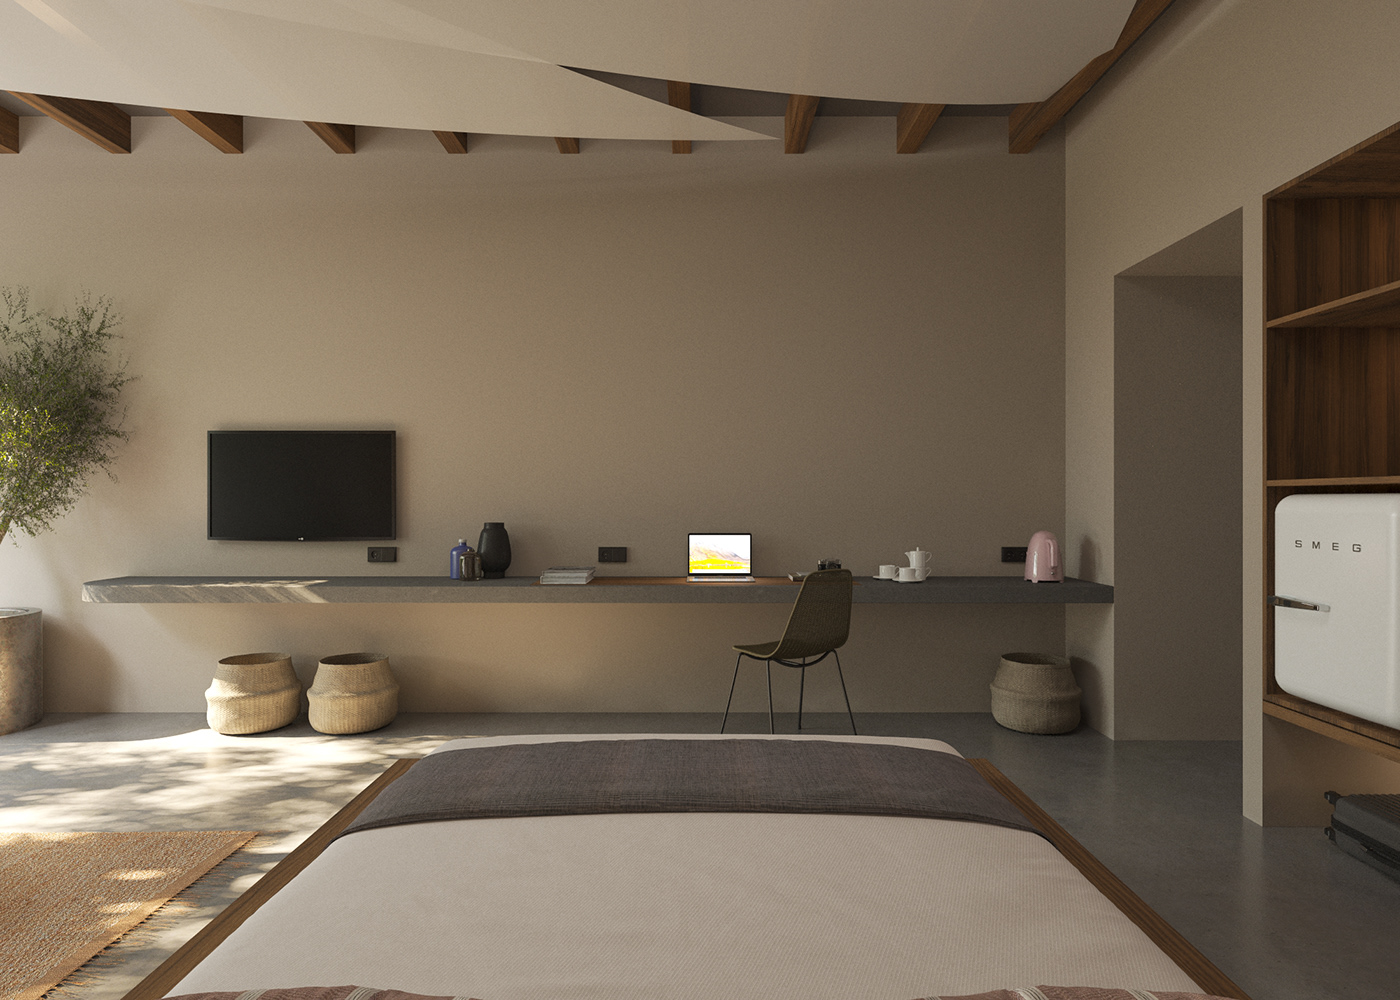 beds corona design hotel hotels house interiors Project room vray